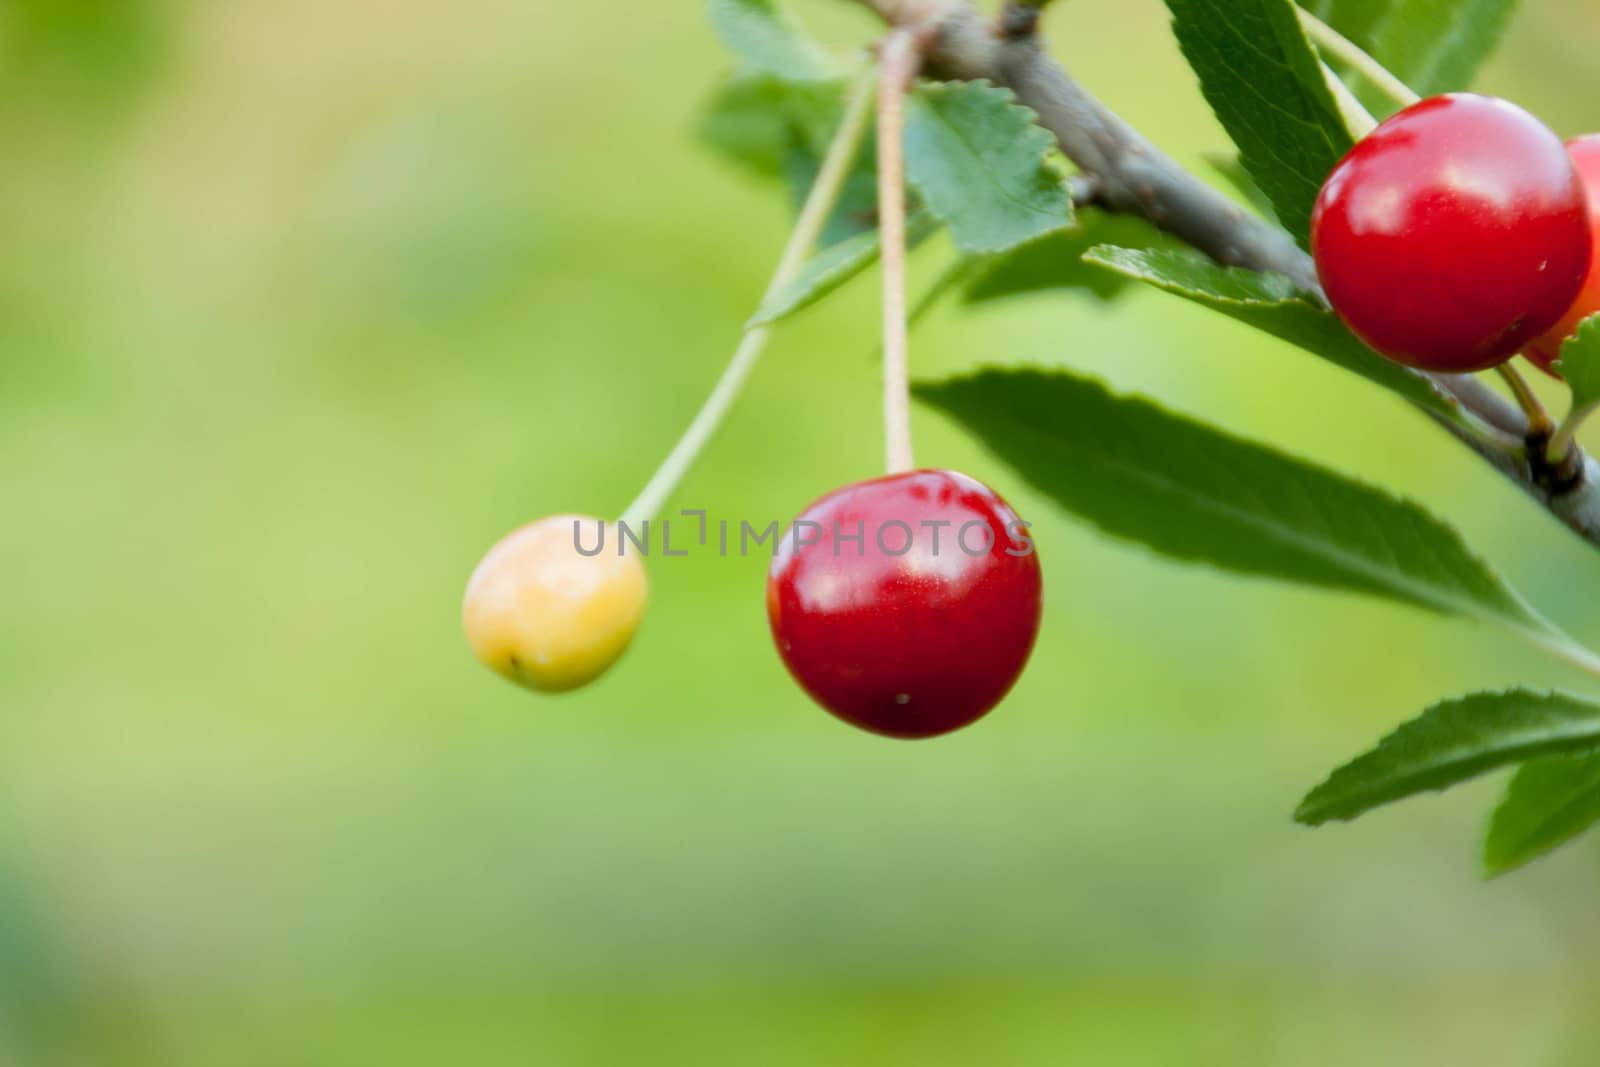 Cherries on the branch on a green background